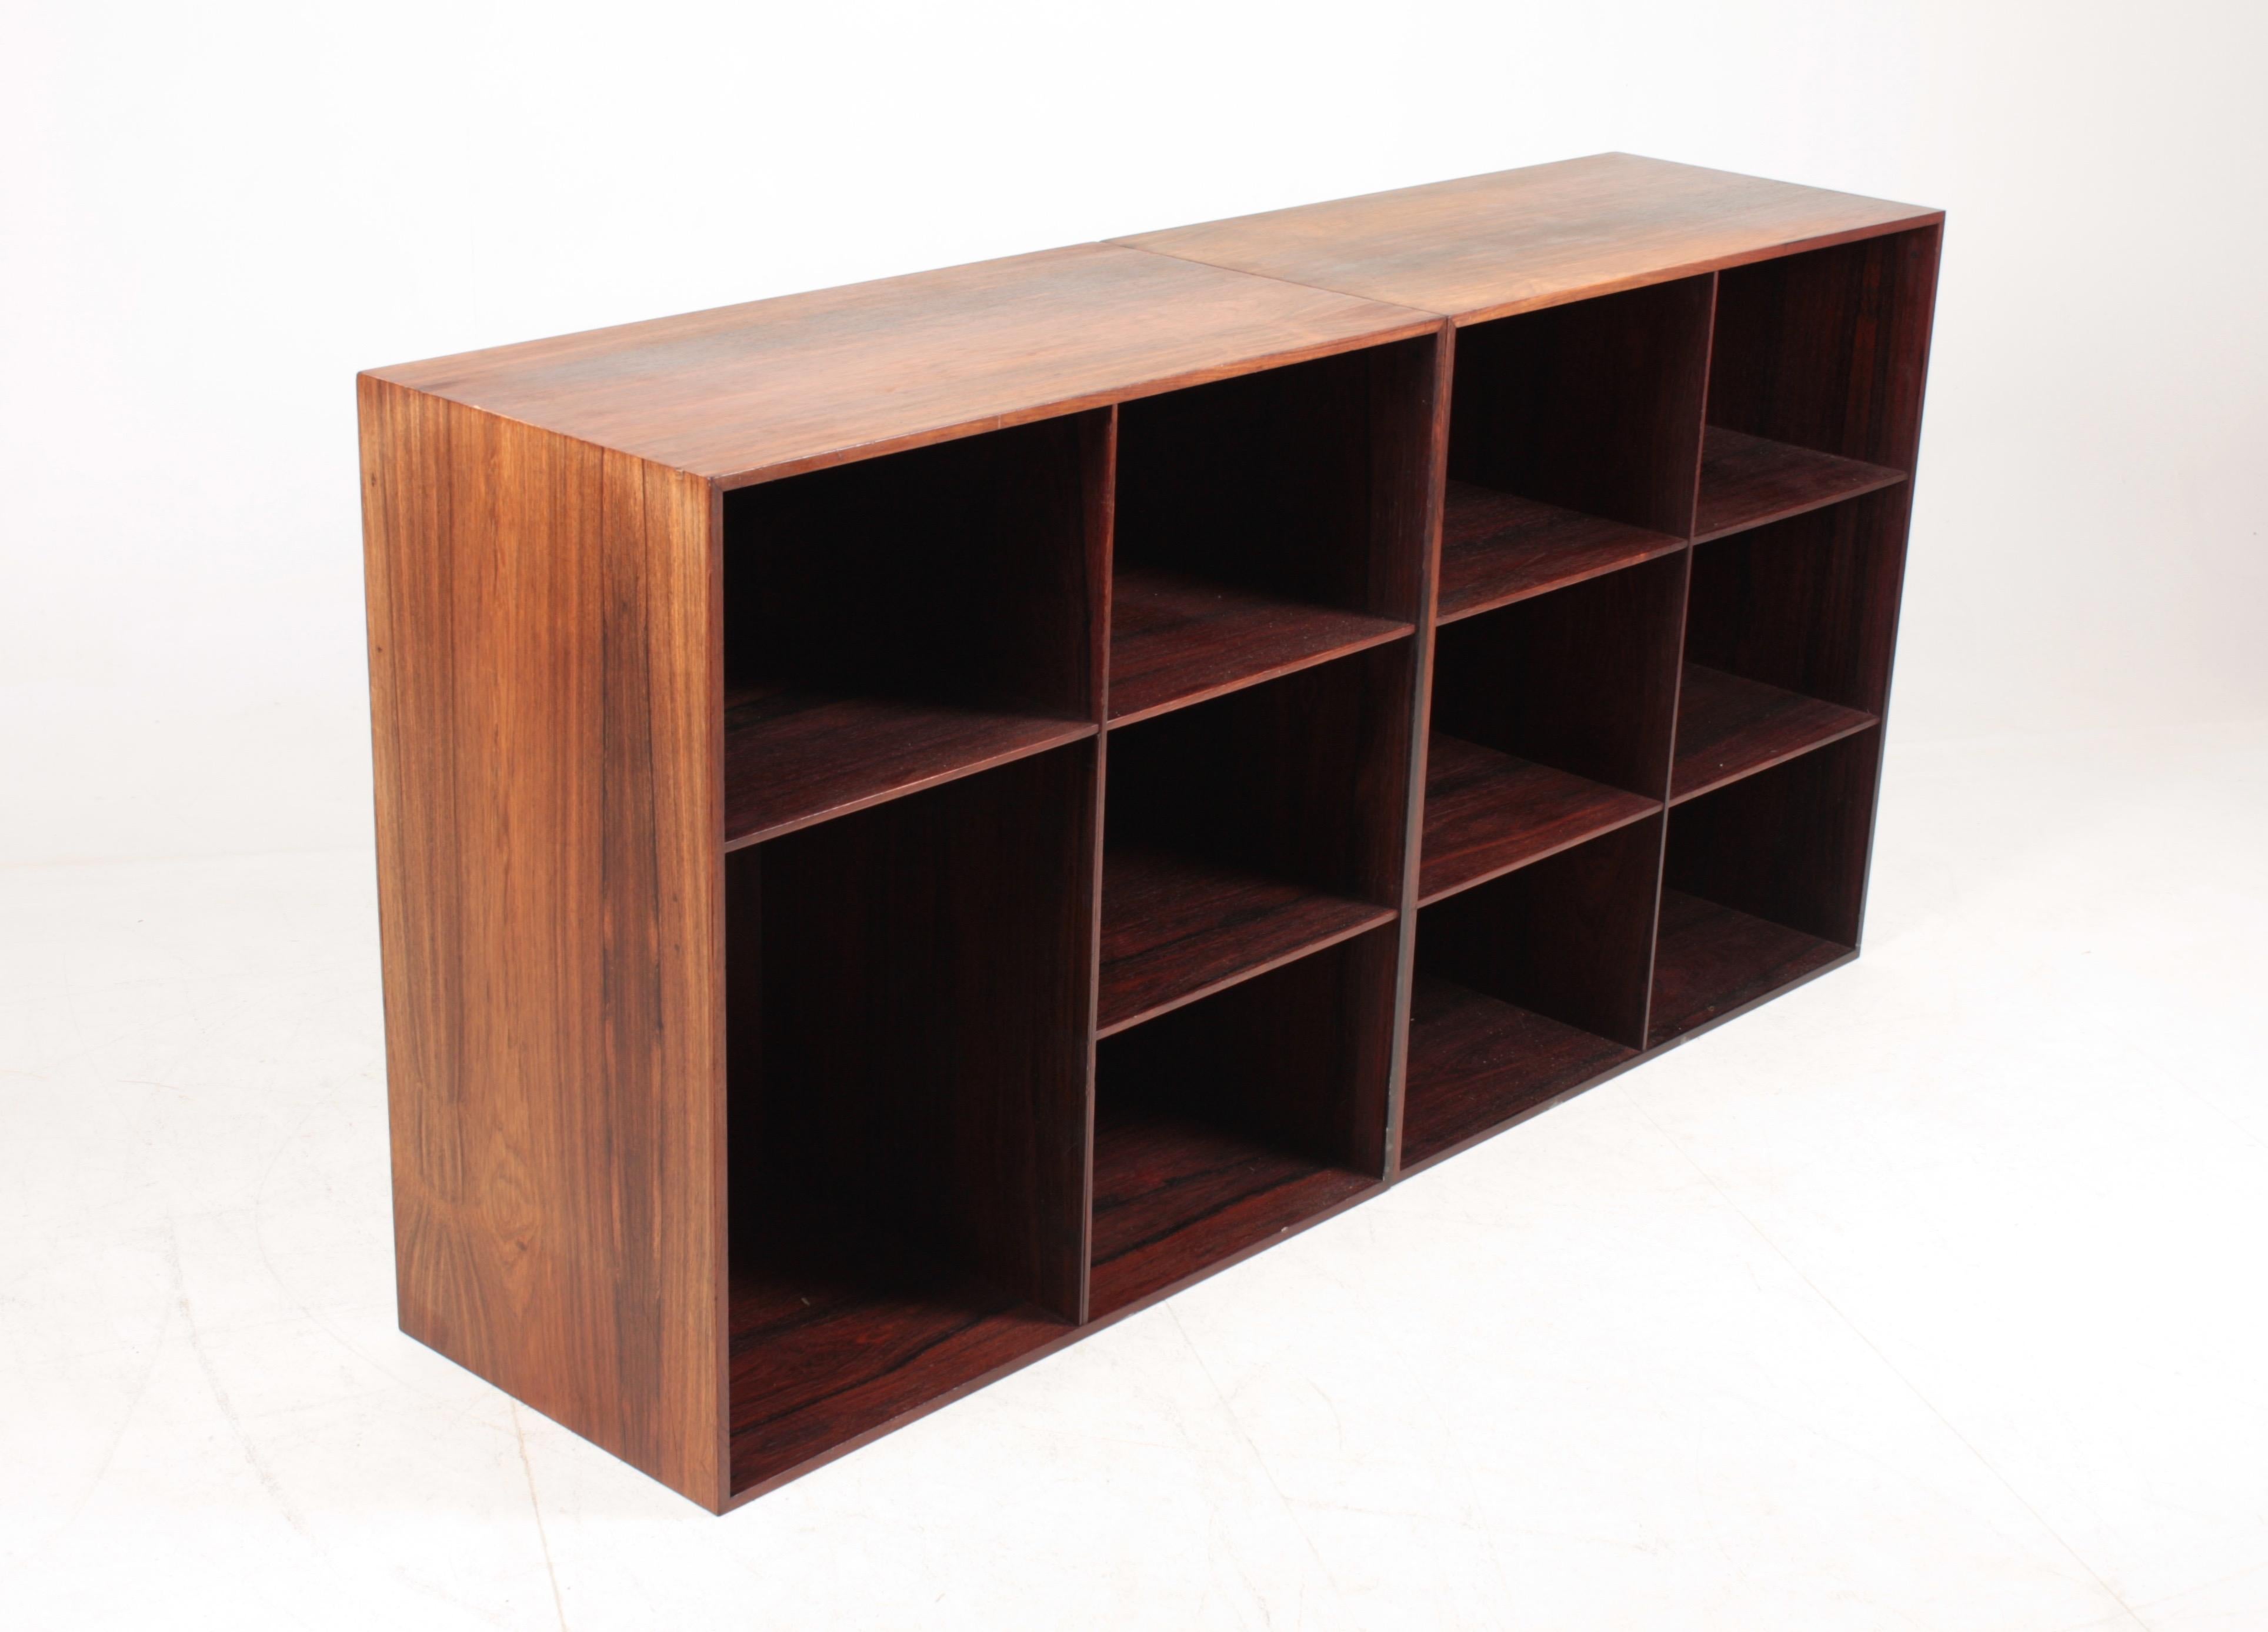 Scandinavian Modern Pair of Bookcases in Rosewood by Mogens Koch, Danish Design, Mid-Century, 1950s For Sale